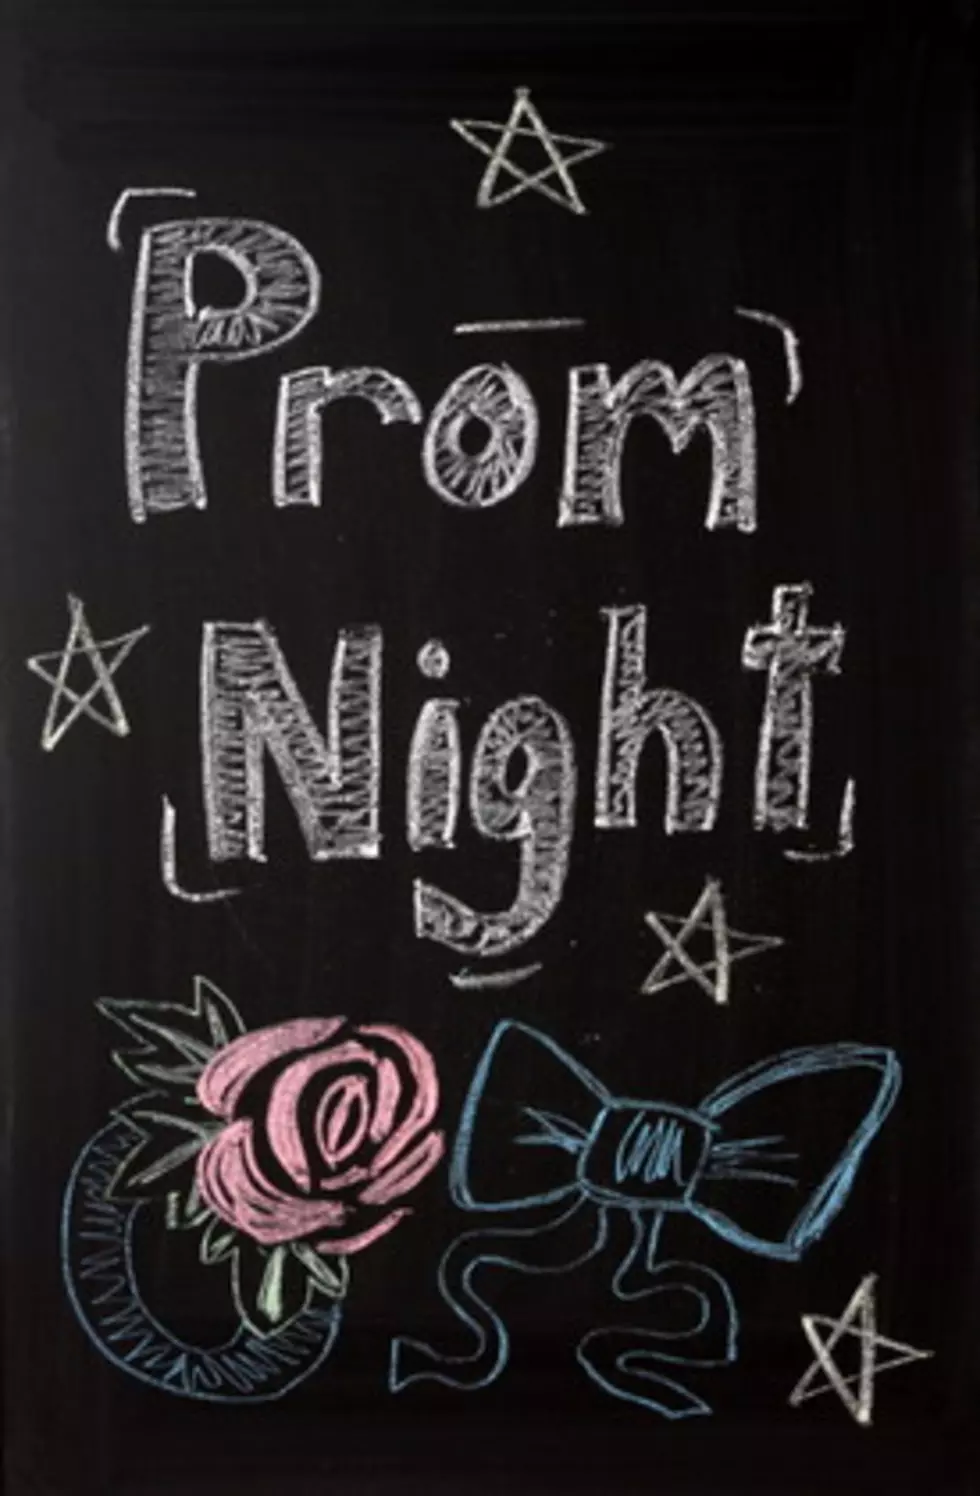 Touching Prom Invitation from Lansing Goes Viral [Video]